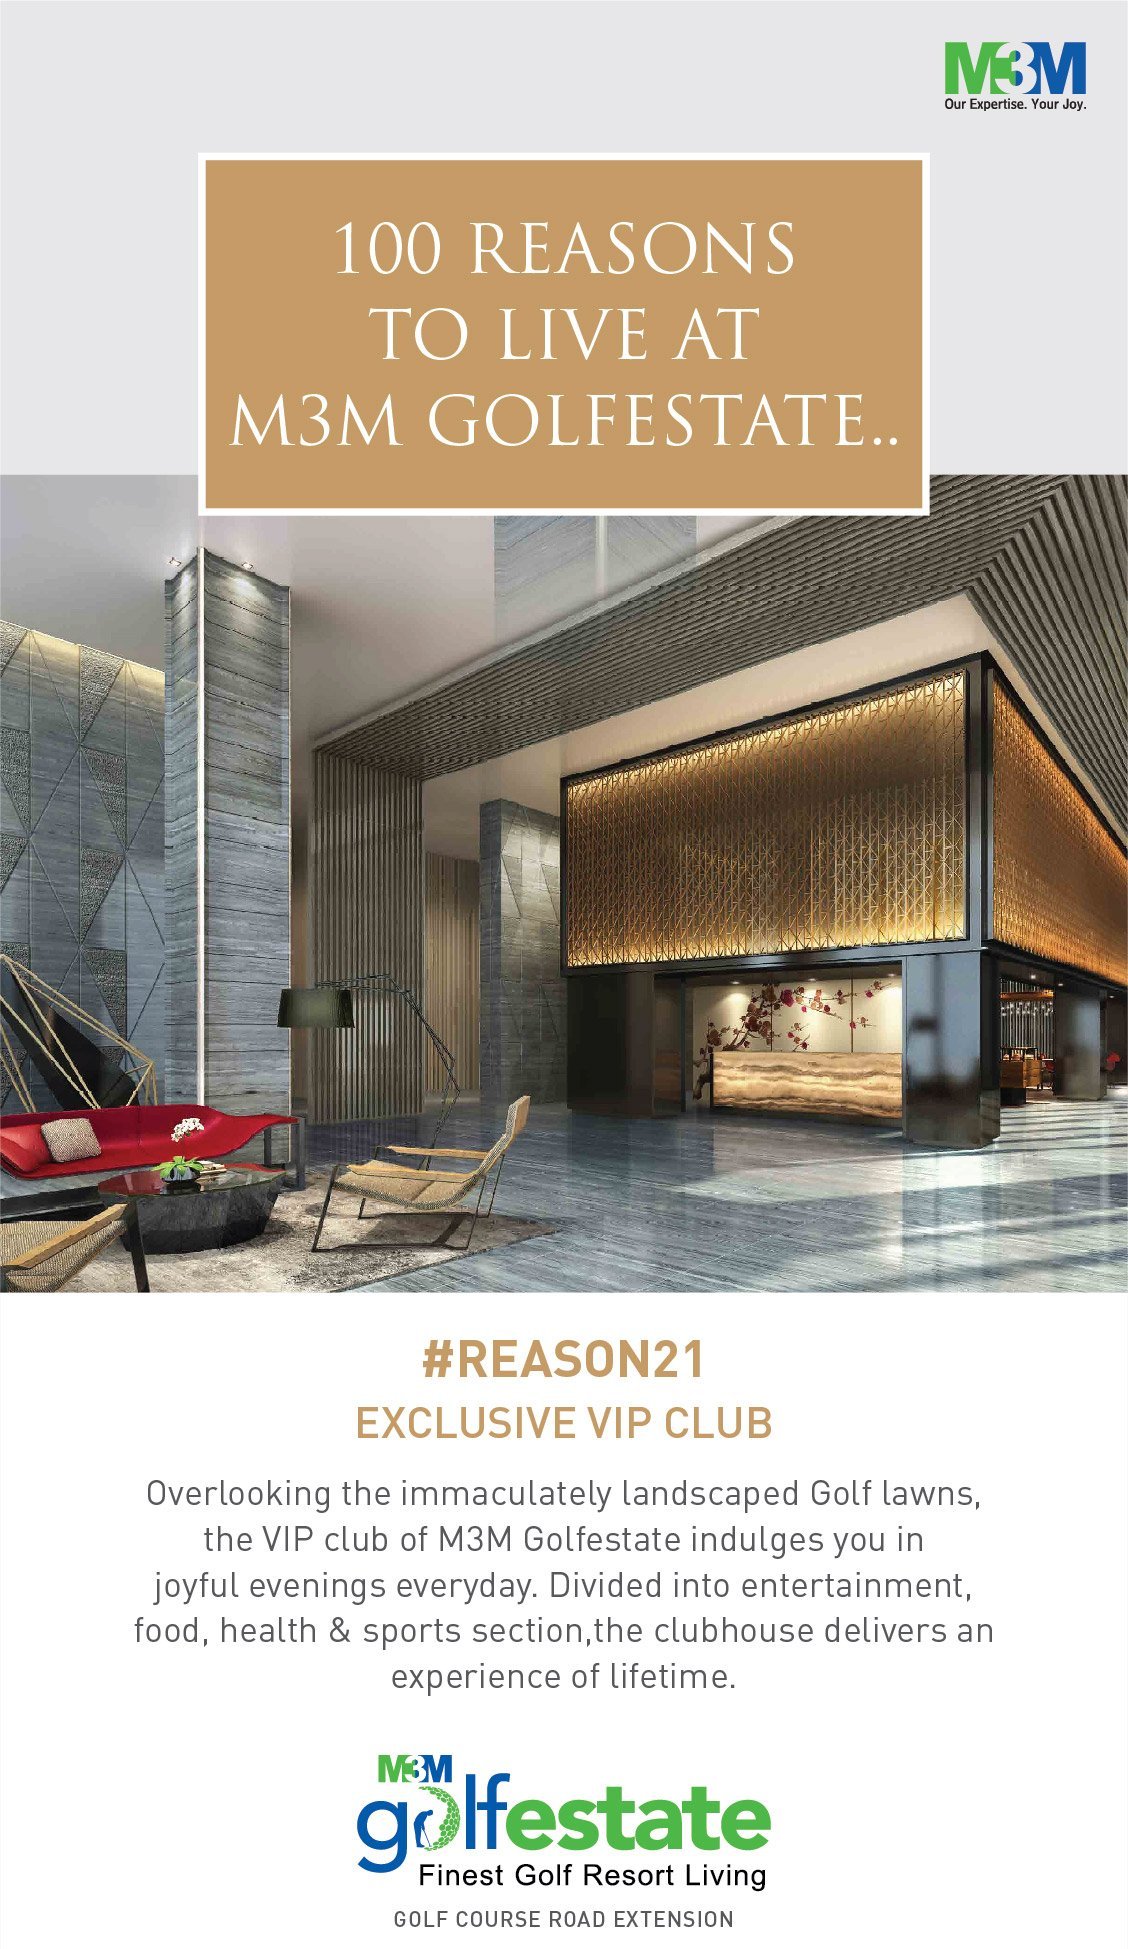 Indulge yourself in joyful evenings everyday with entertainment, food, health & sports at VIP Club in M3M Golf Estate